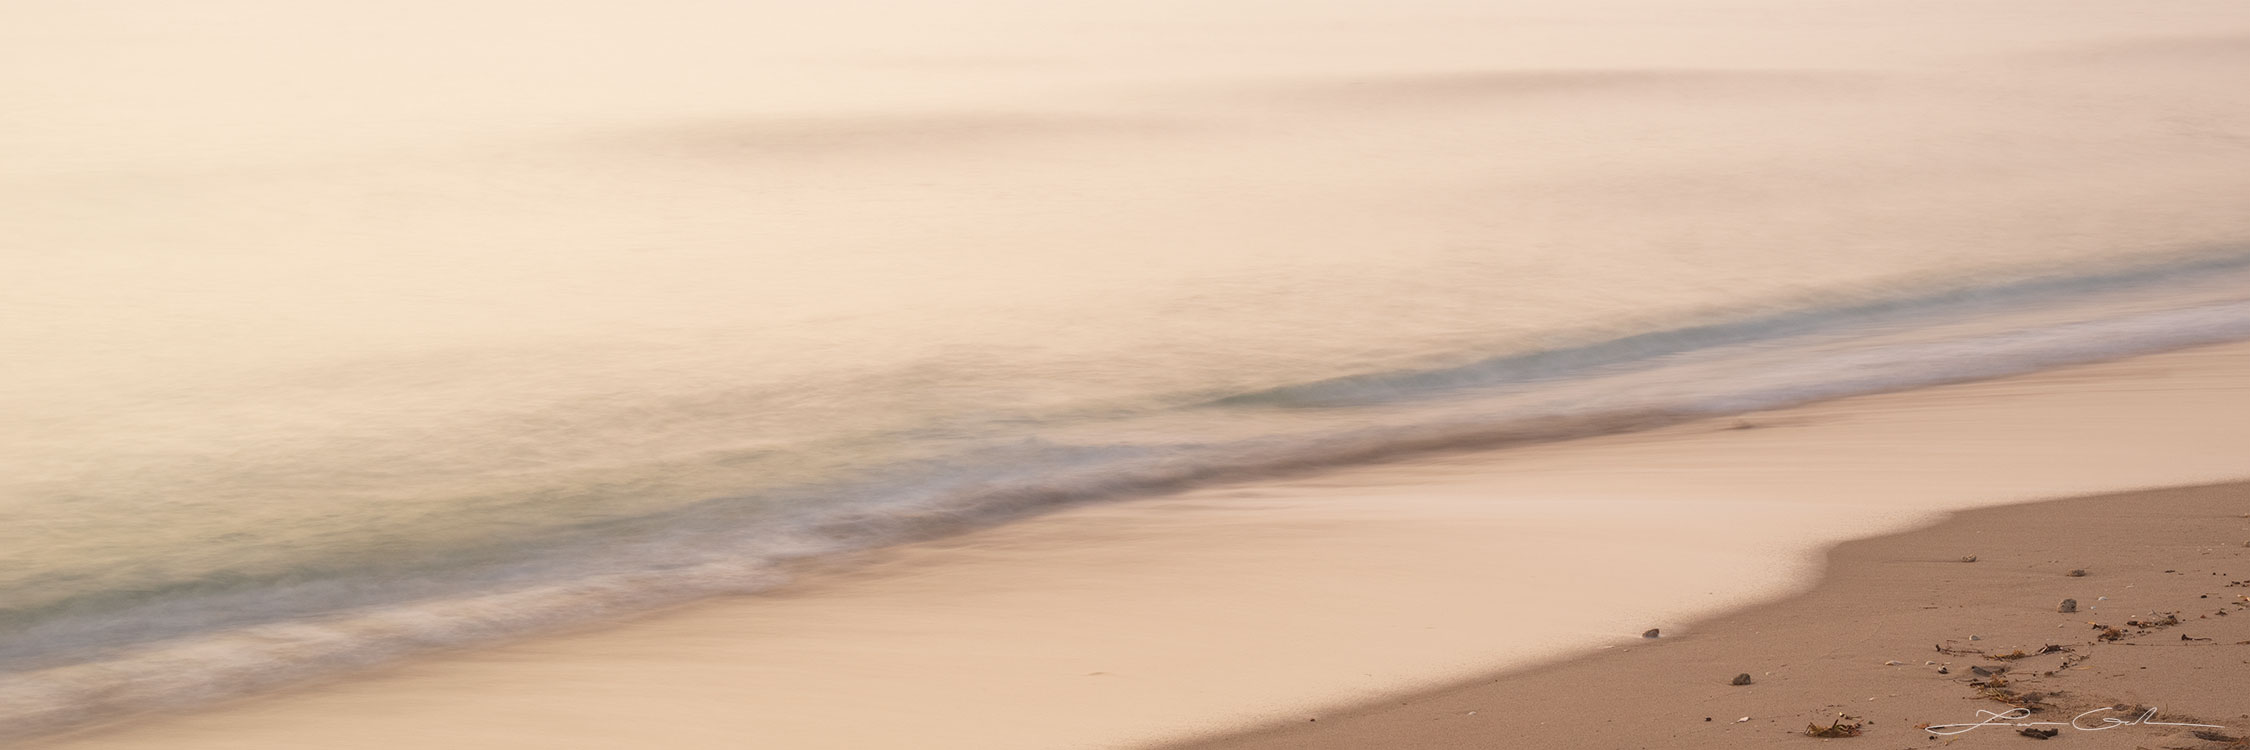 A peaceful shore close-up with some sand and a small wave - Gintchin Fine Art